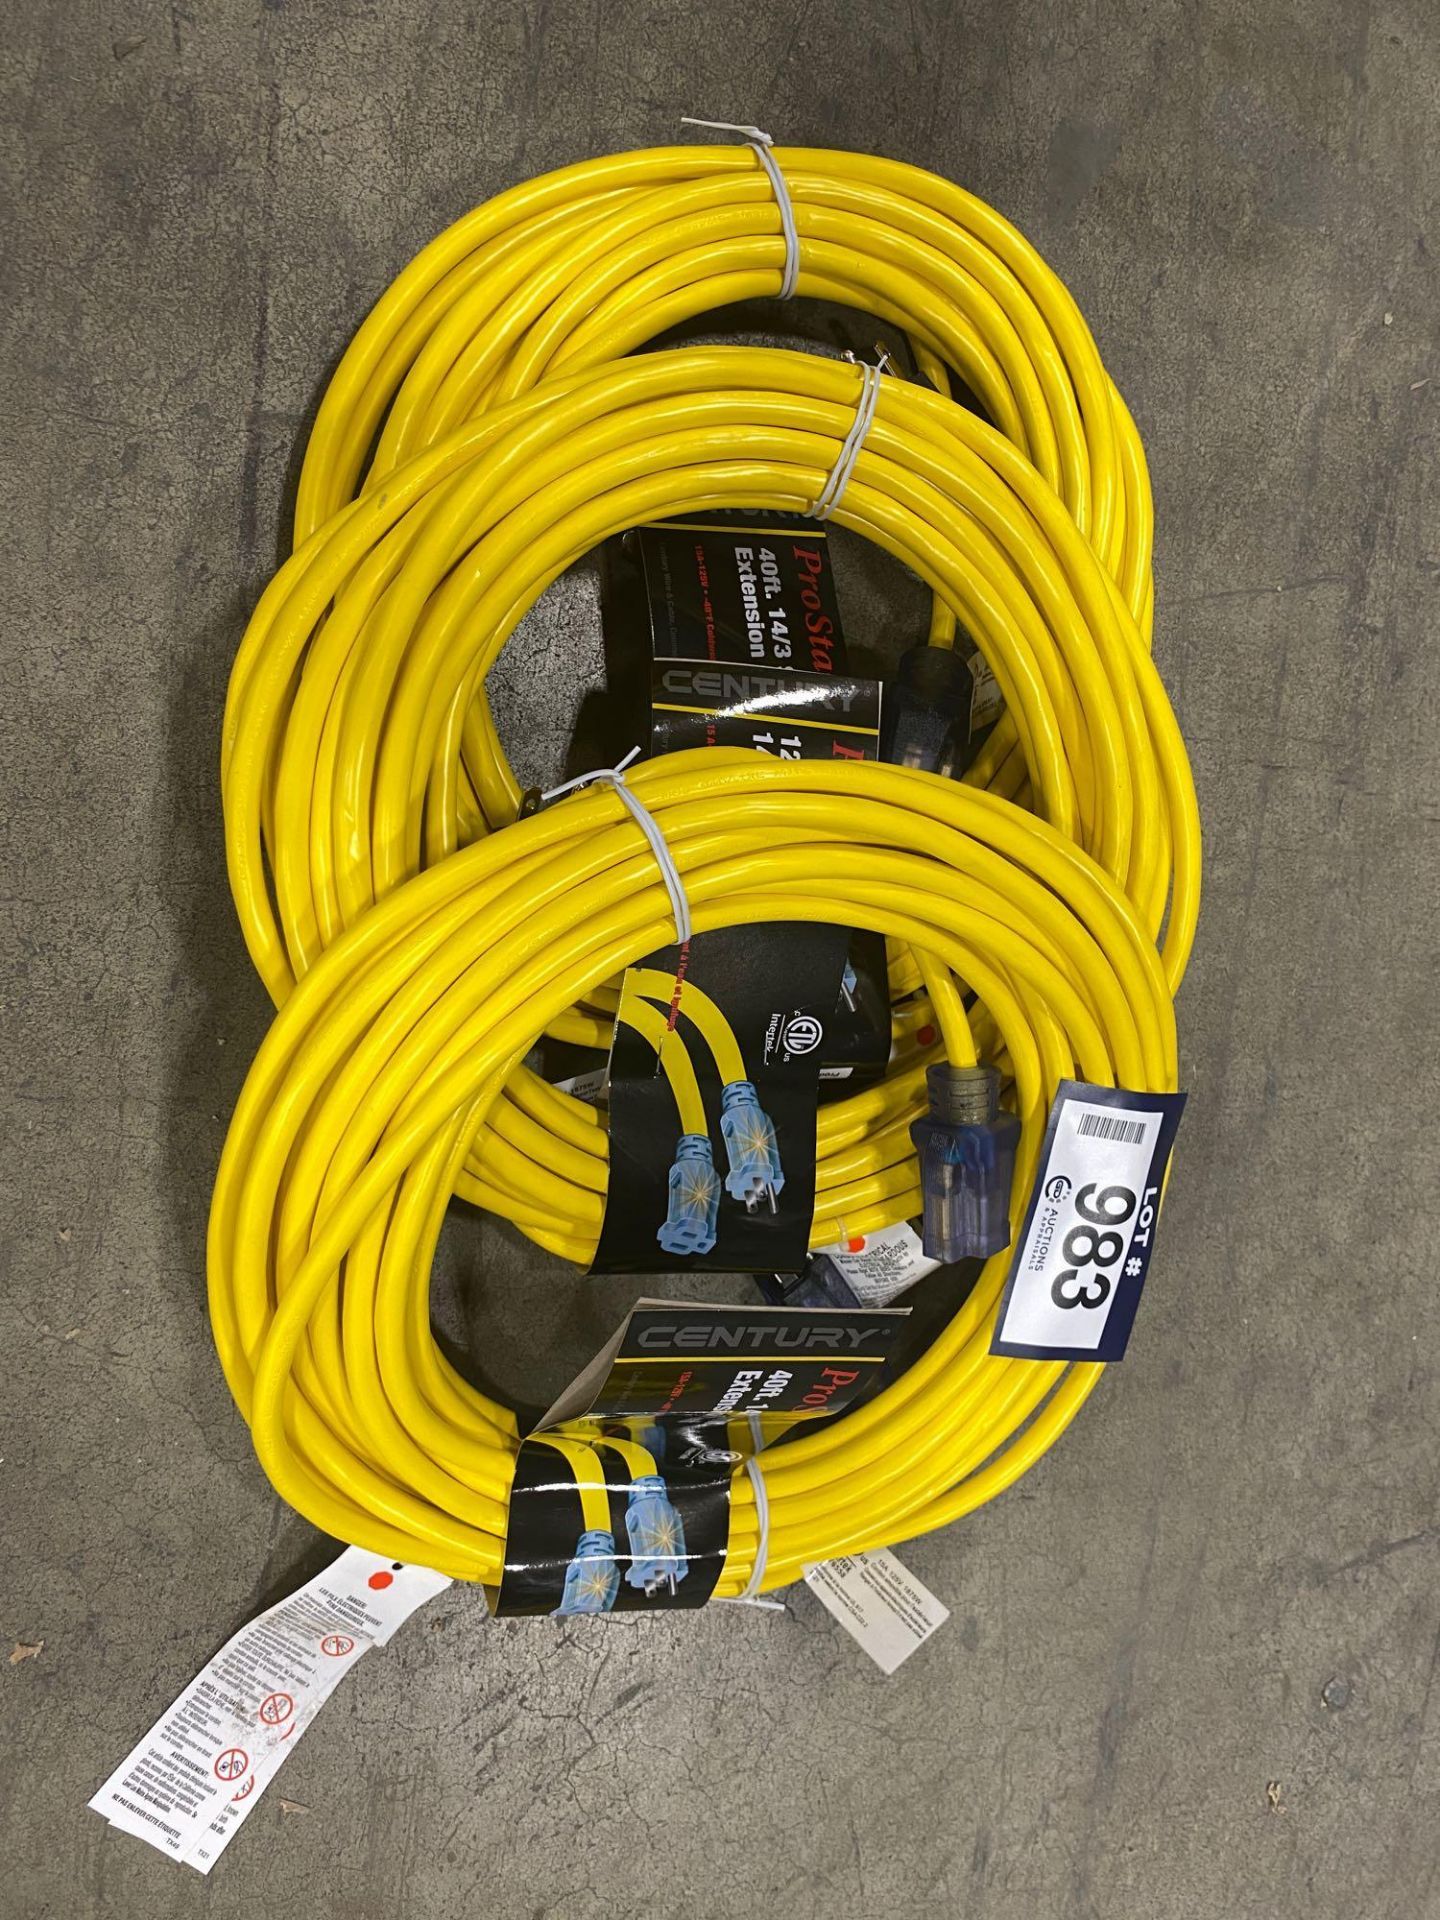 Lot of (3) Century ProStar 40ft. Extension Cords - Image 2 of 2